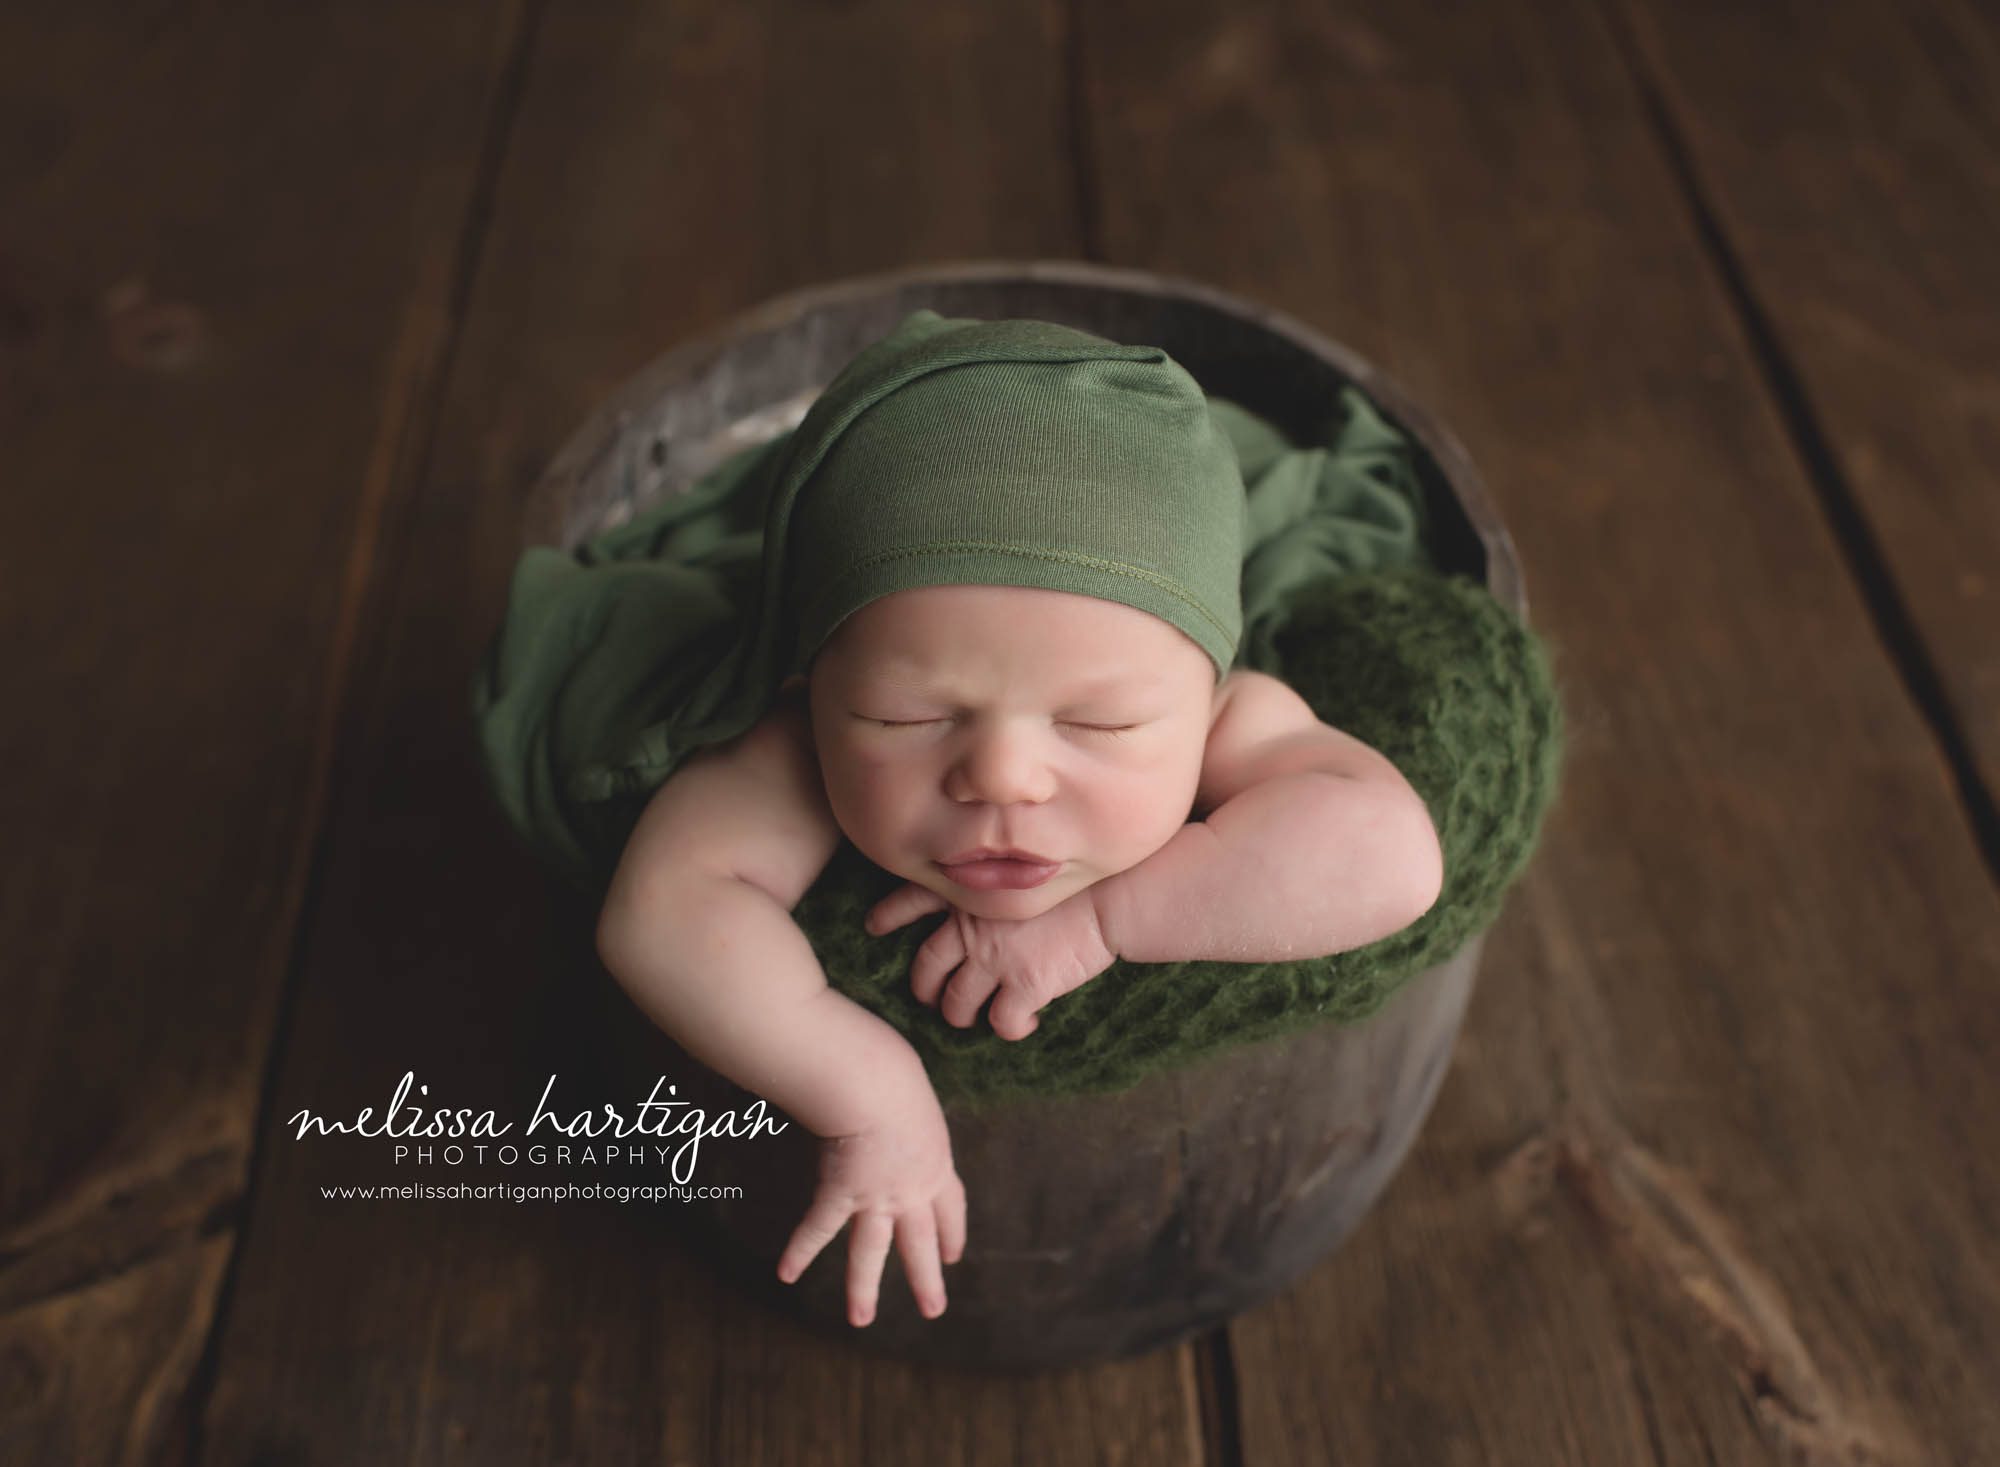 Newborn Session CT baby boy sleeping in wooden bucket with green blanket and hat